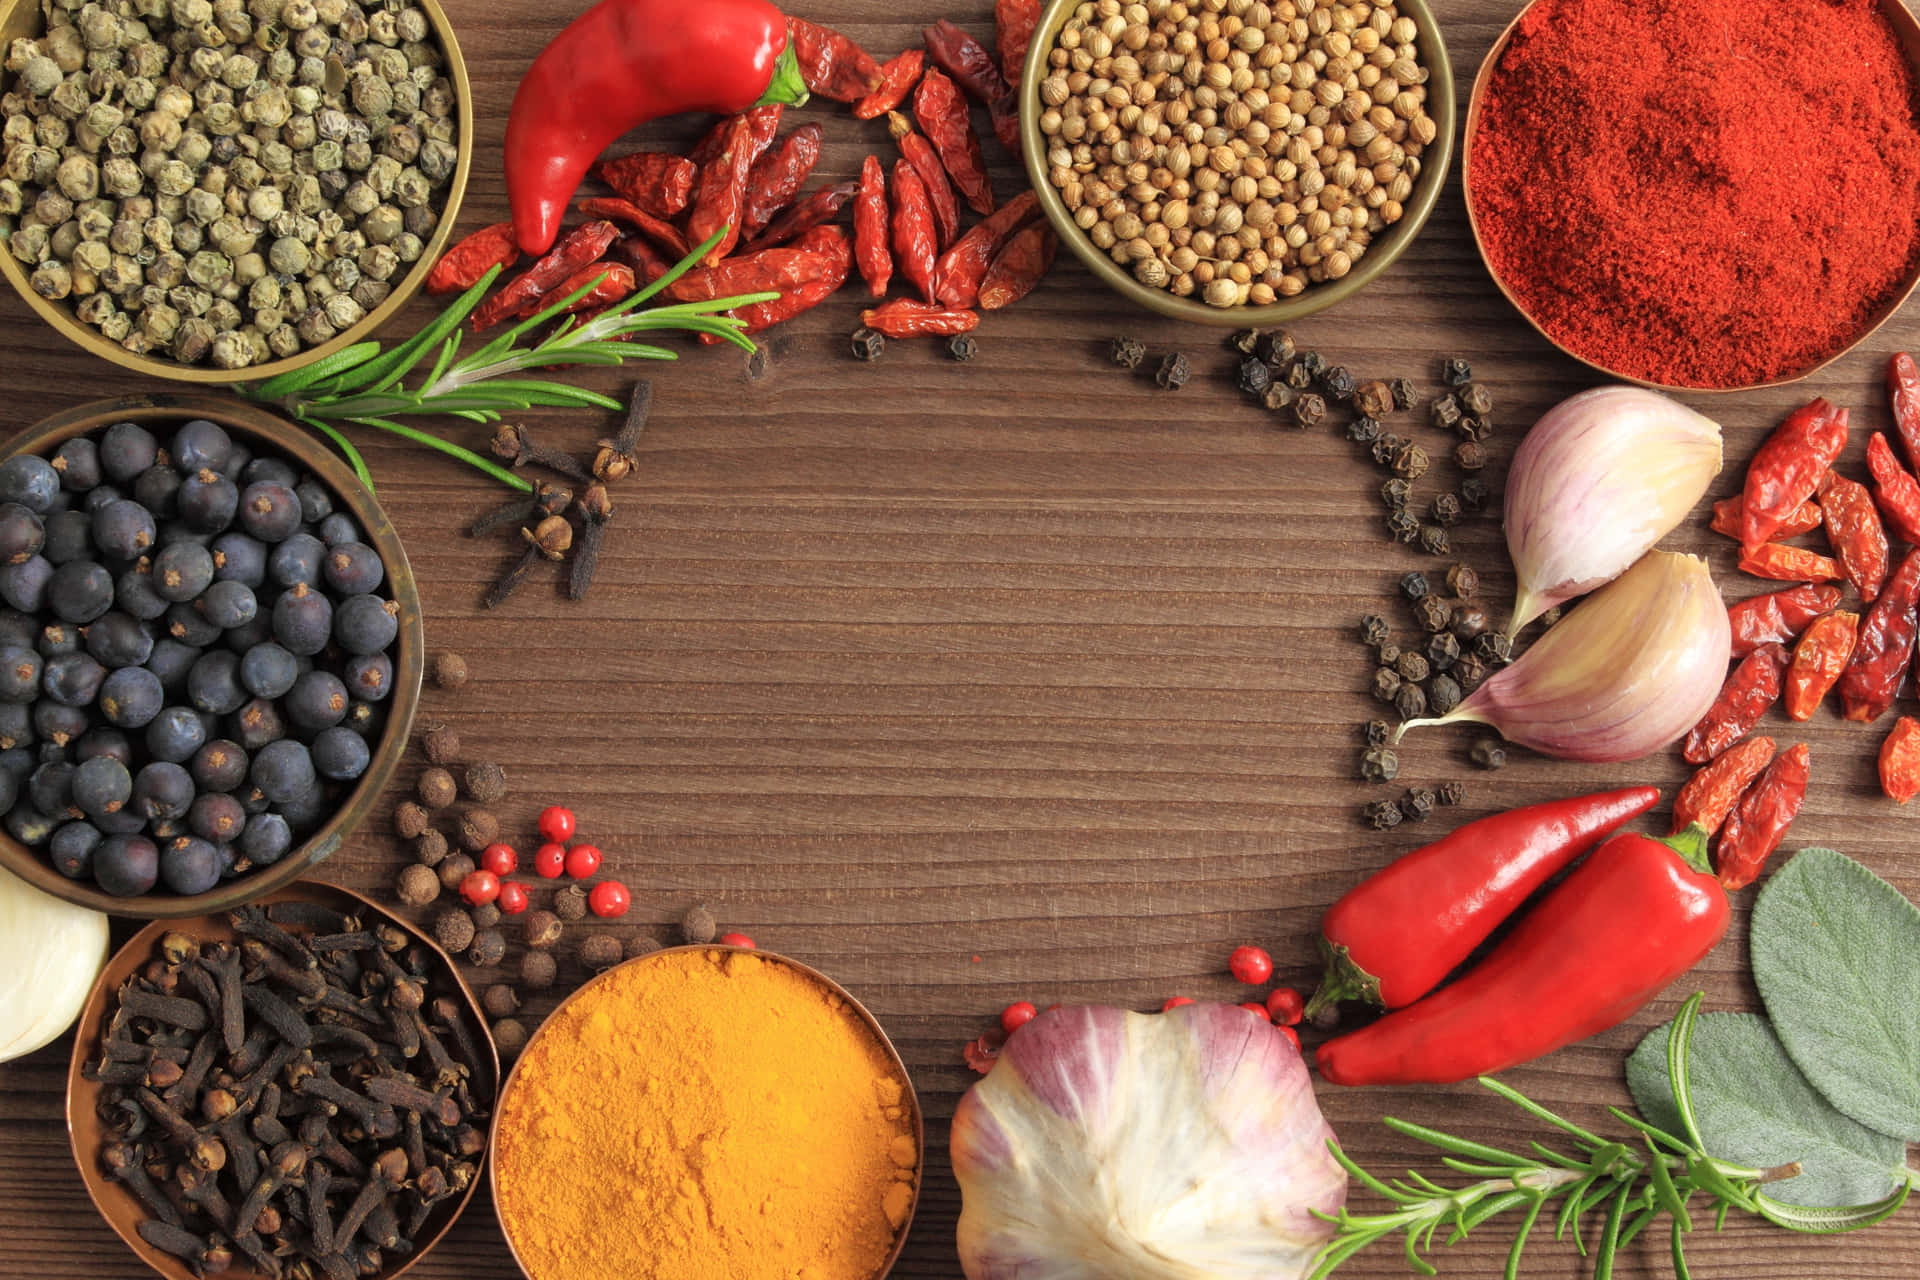 Celebrating the Flavorful Addition of Spice to Meals